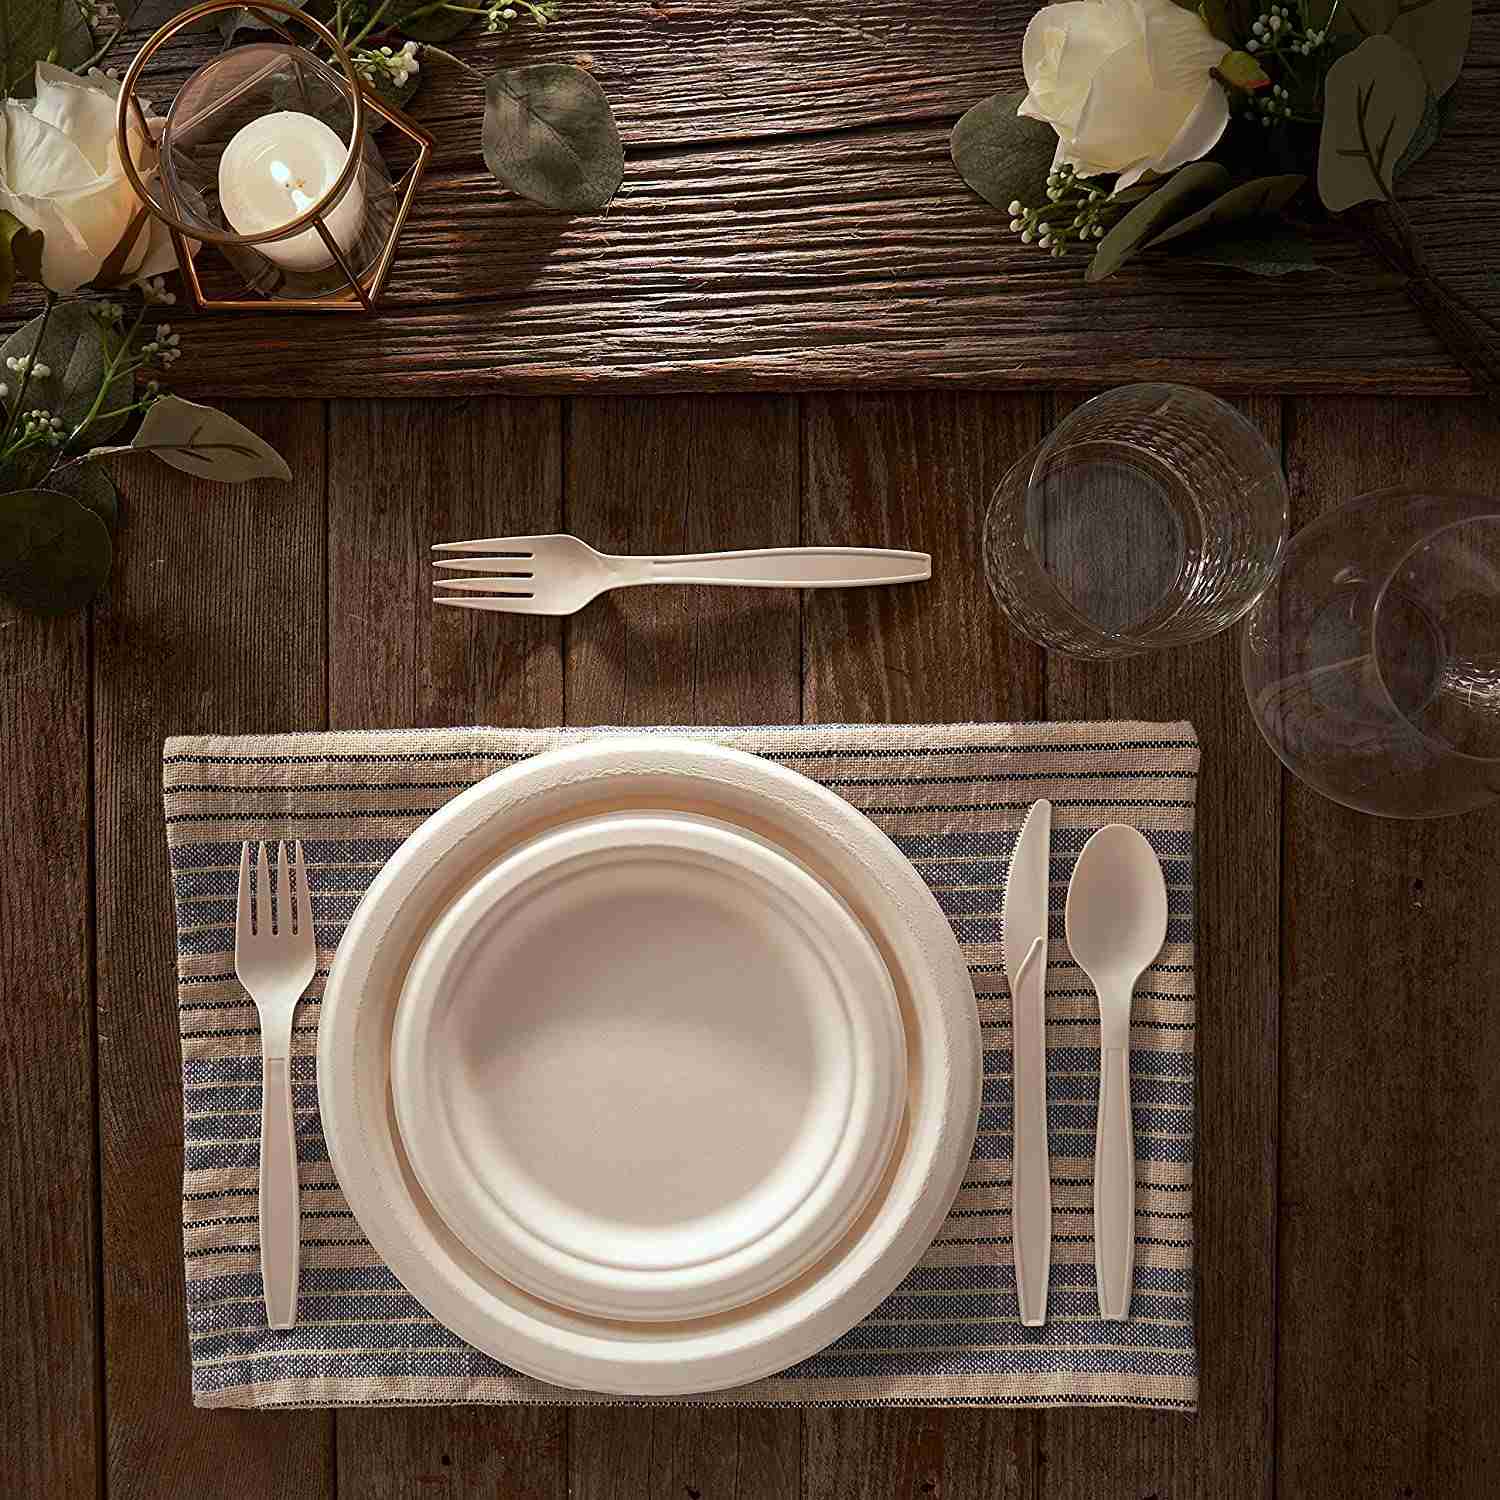 biodegradable sugarcane plates and cutlery set